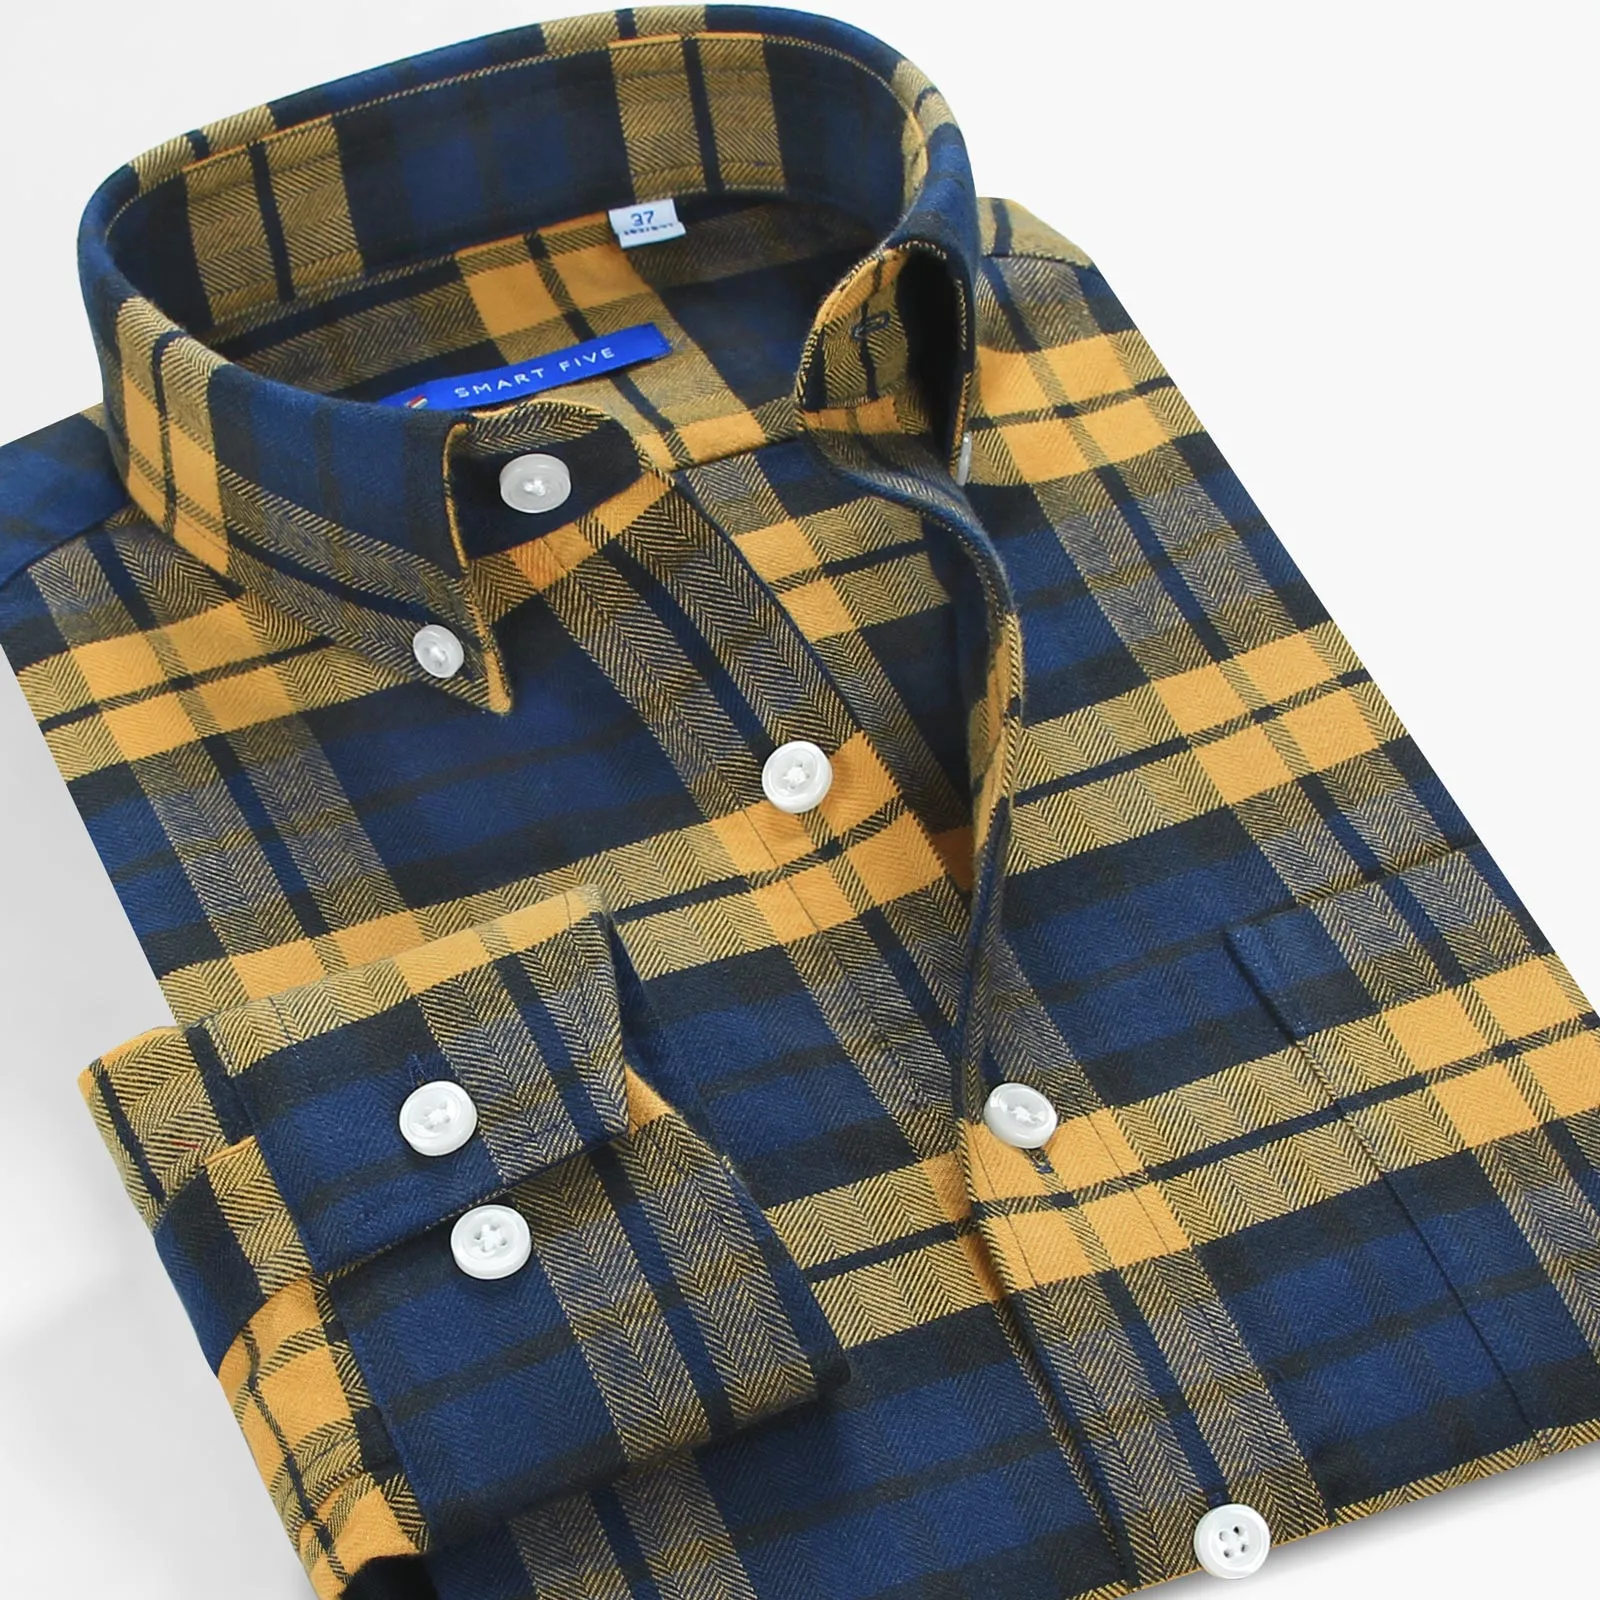 

Smart Five Flannel Shirt Men Clothing Thick Long Sleeve Casual Plaid Shirt Slim Fit Branded Vintage 2021 New Man Shirts